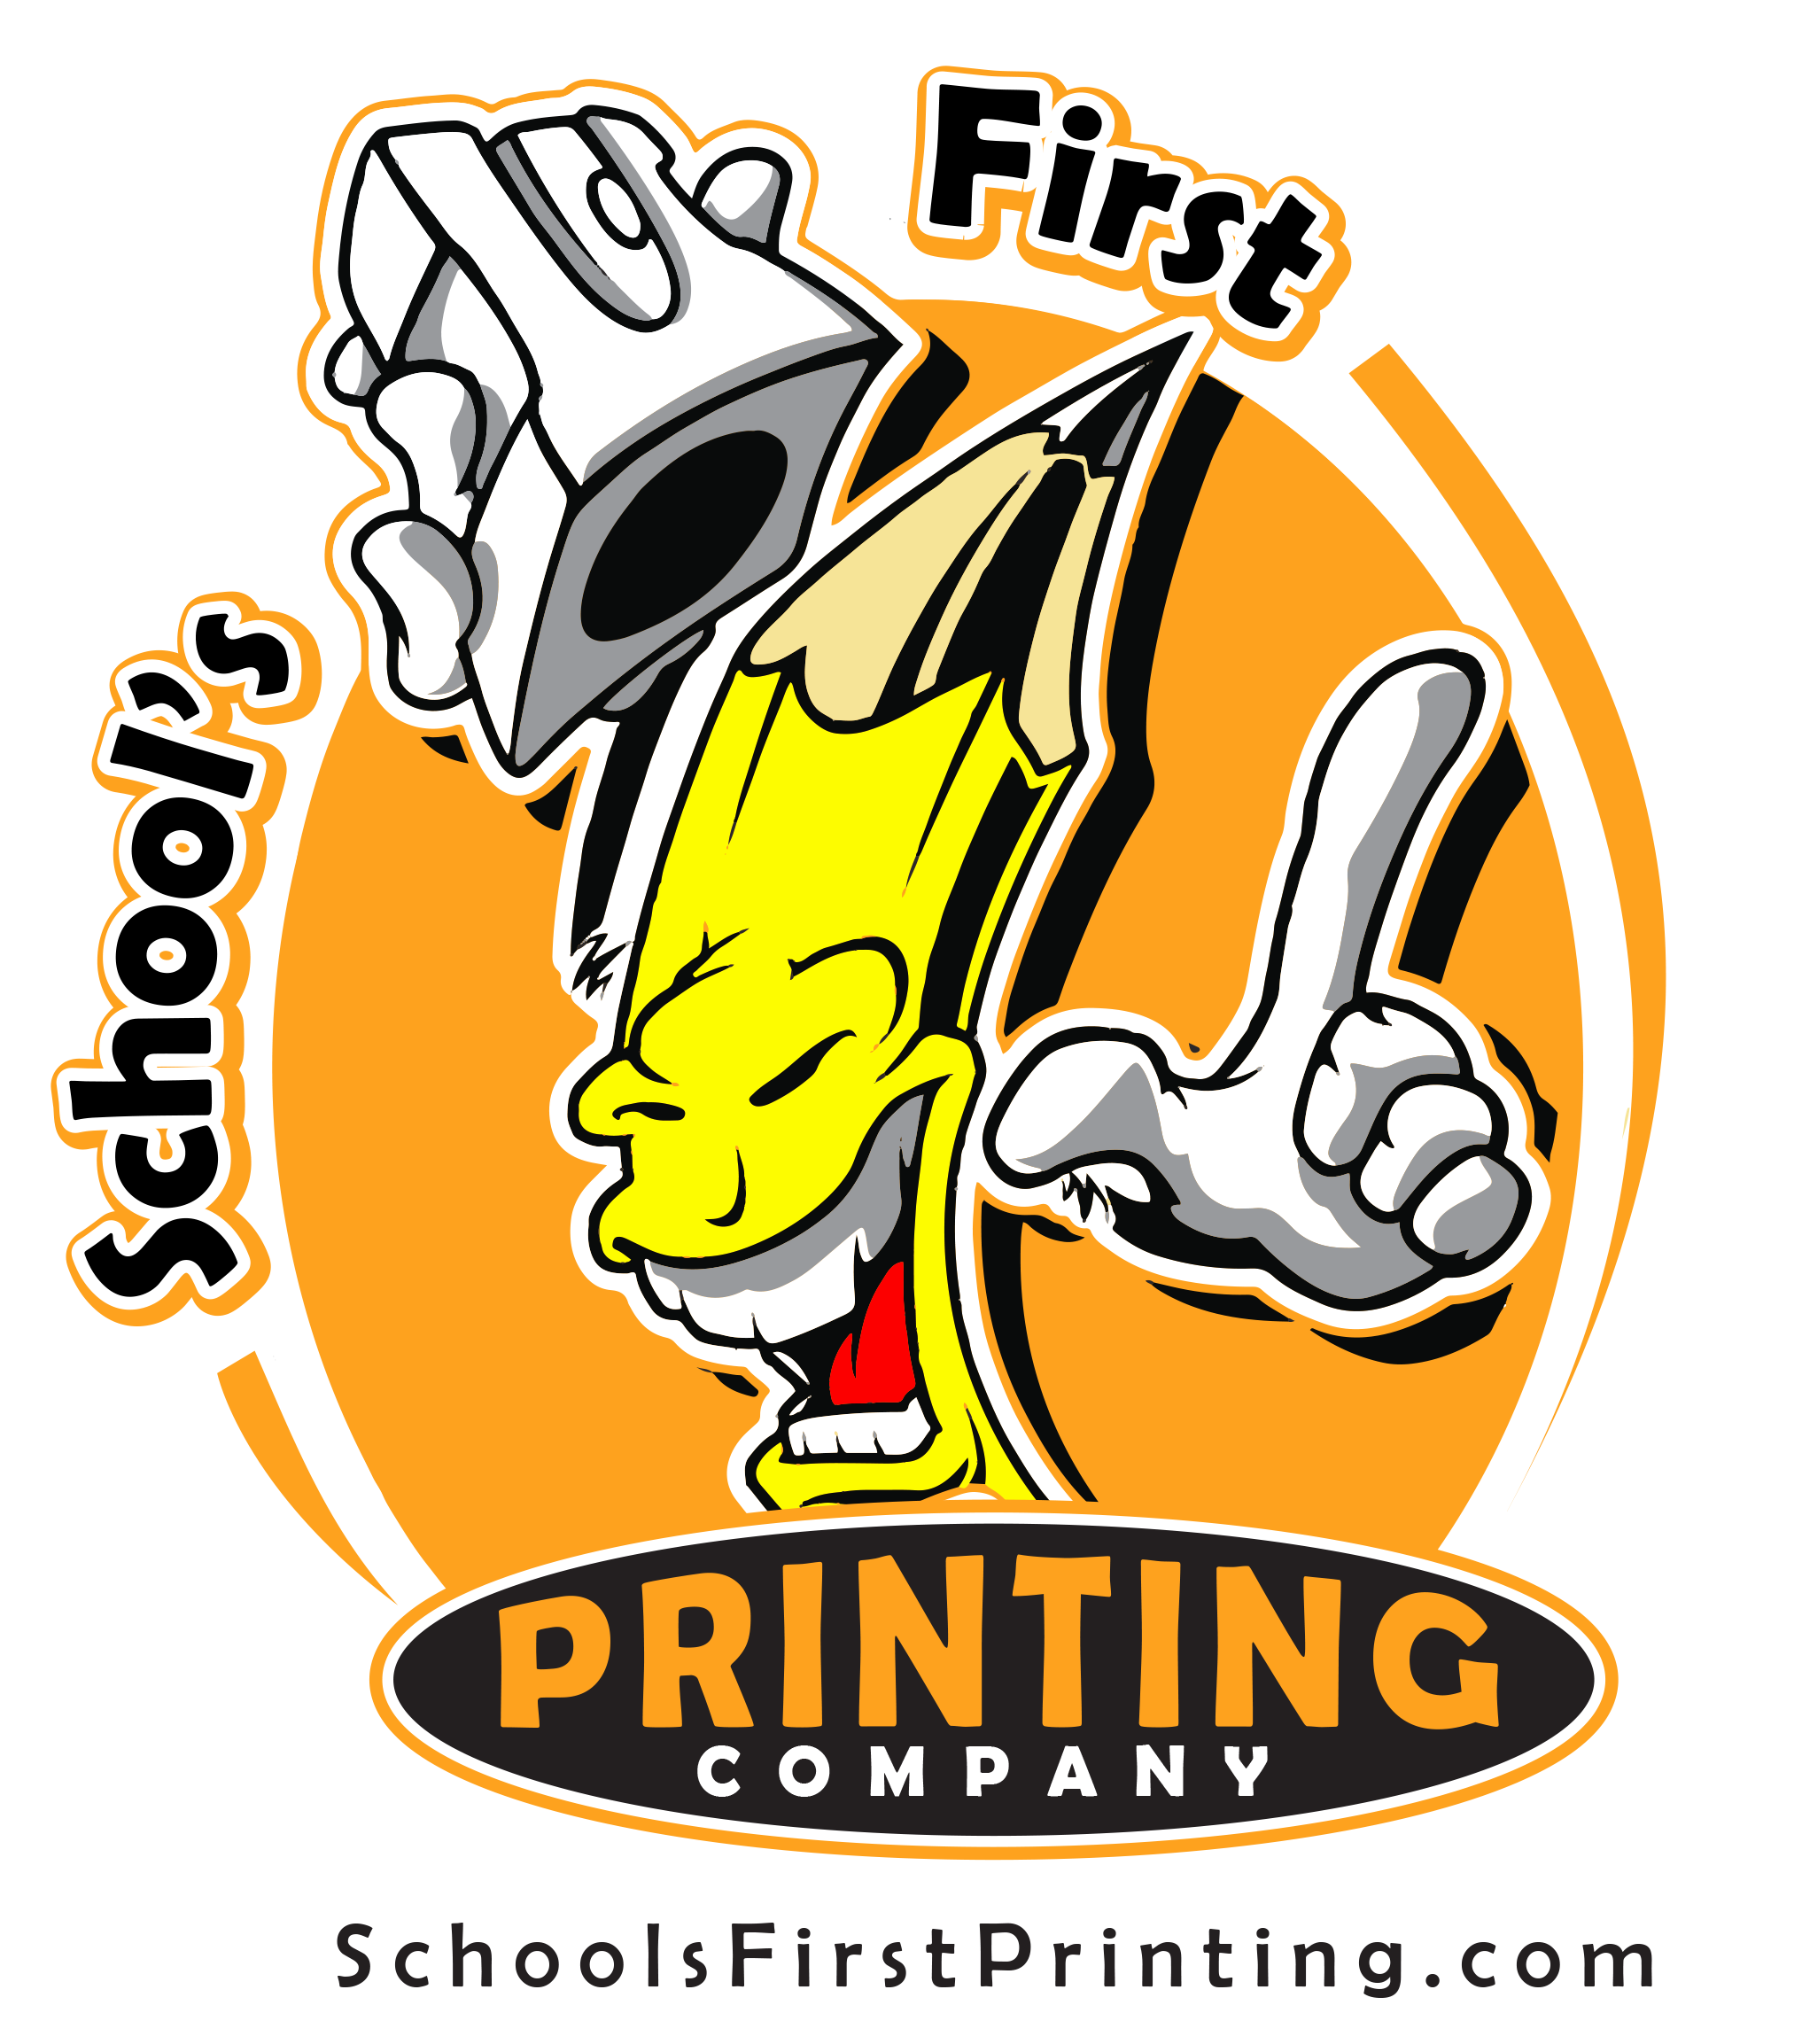 Schools First Printing Company